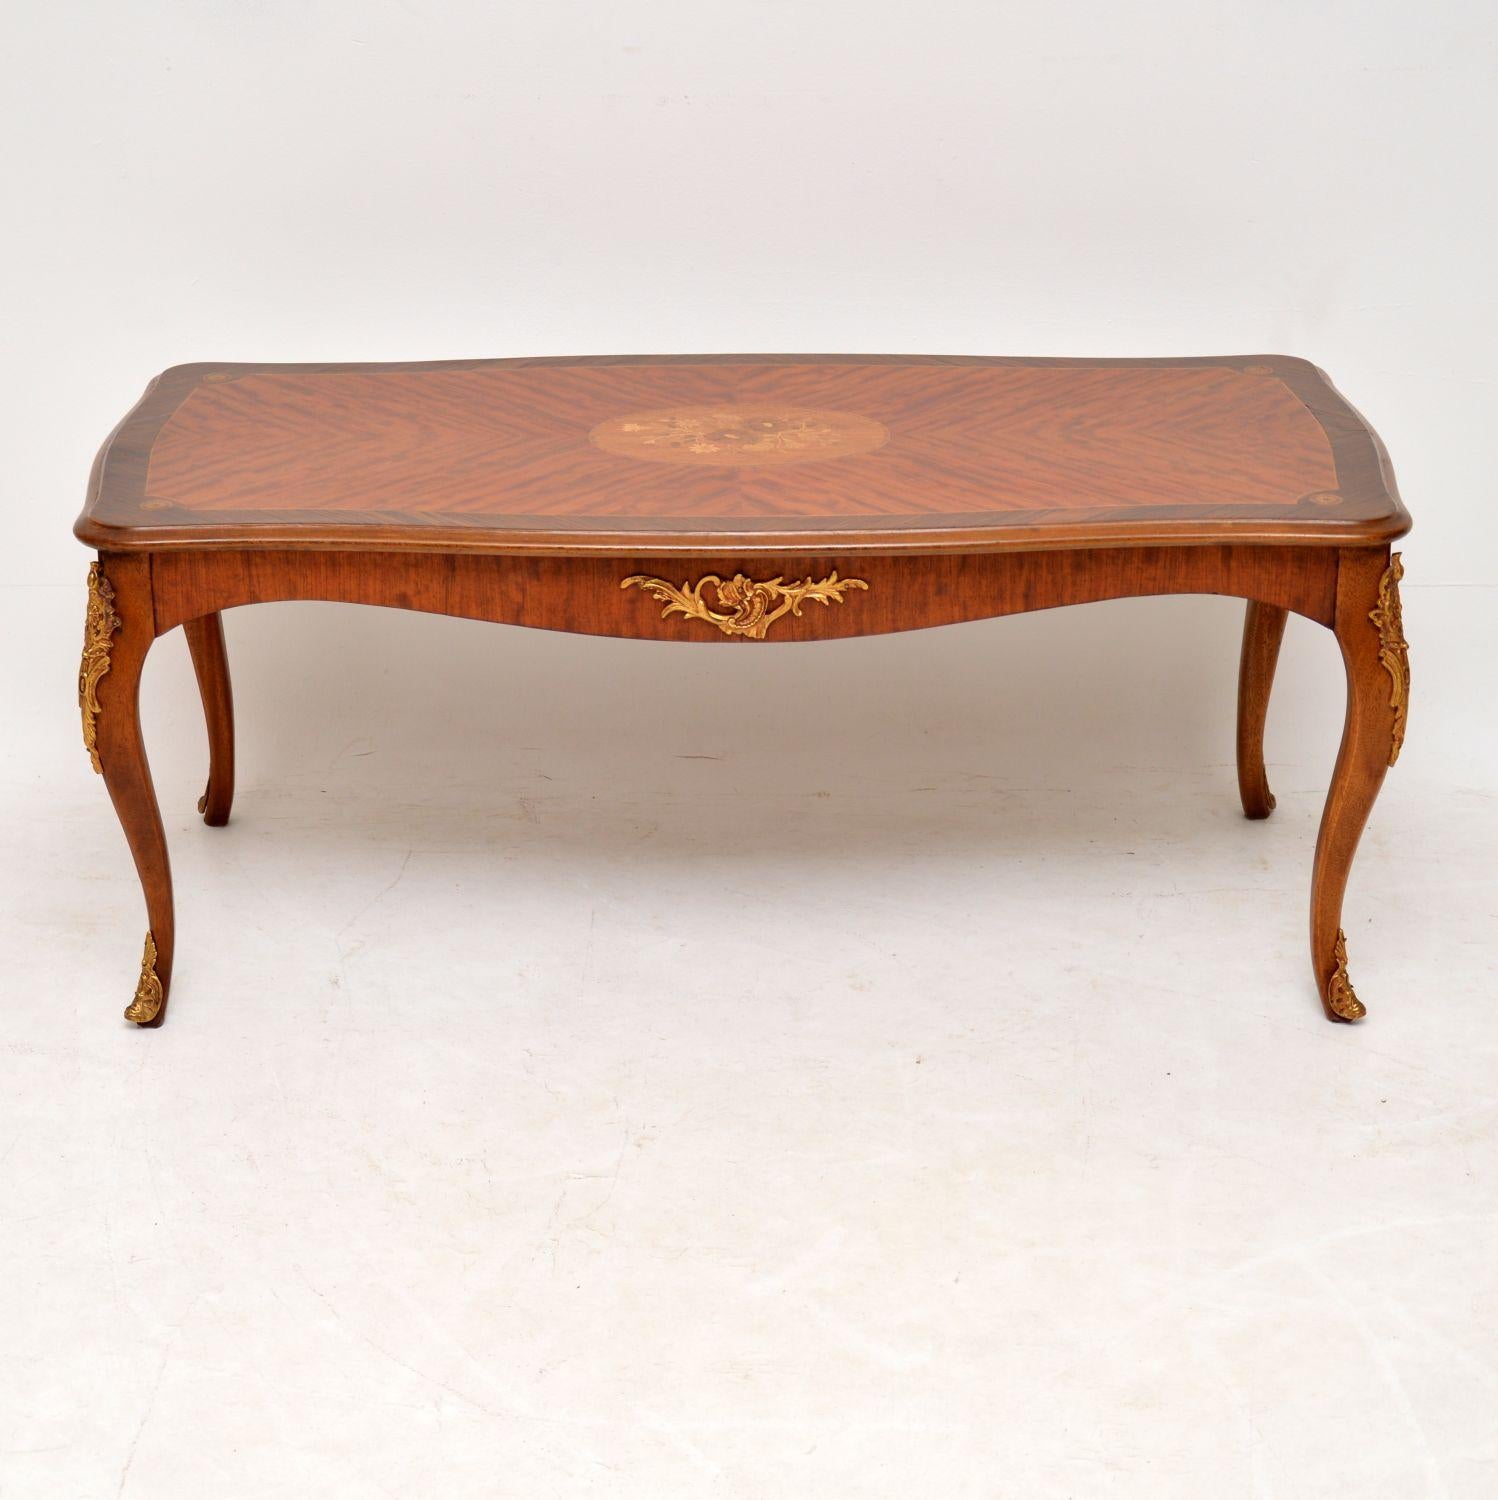 Antique French style King wood, satinwood and rosewood coffee table, in excellent condition and dating from circa 1930s-1950s period. It has an inlaid crossbanded rosewood top edge and the oval central top panel has some exquisite floral marquetry.